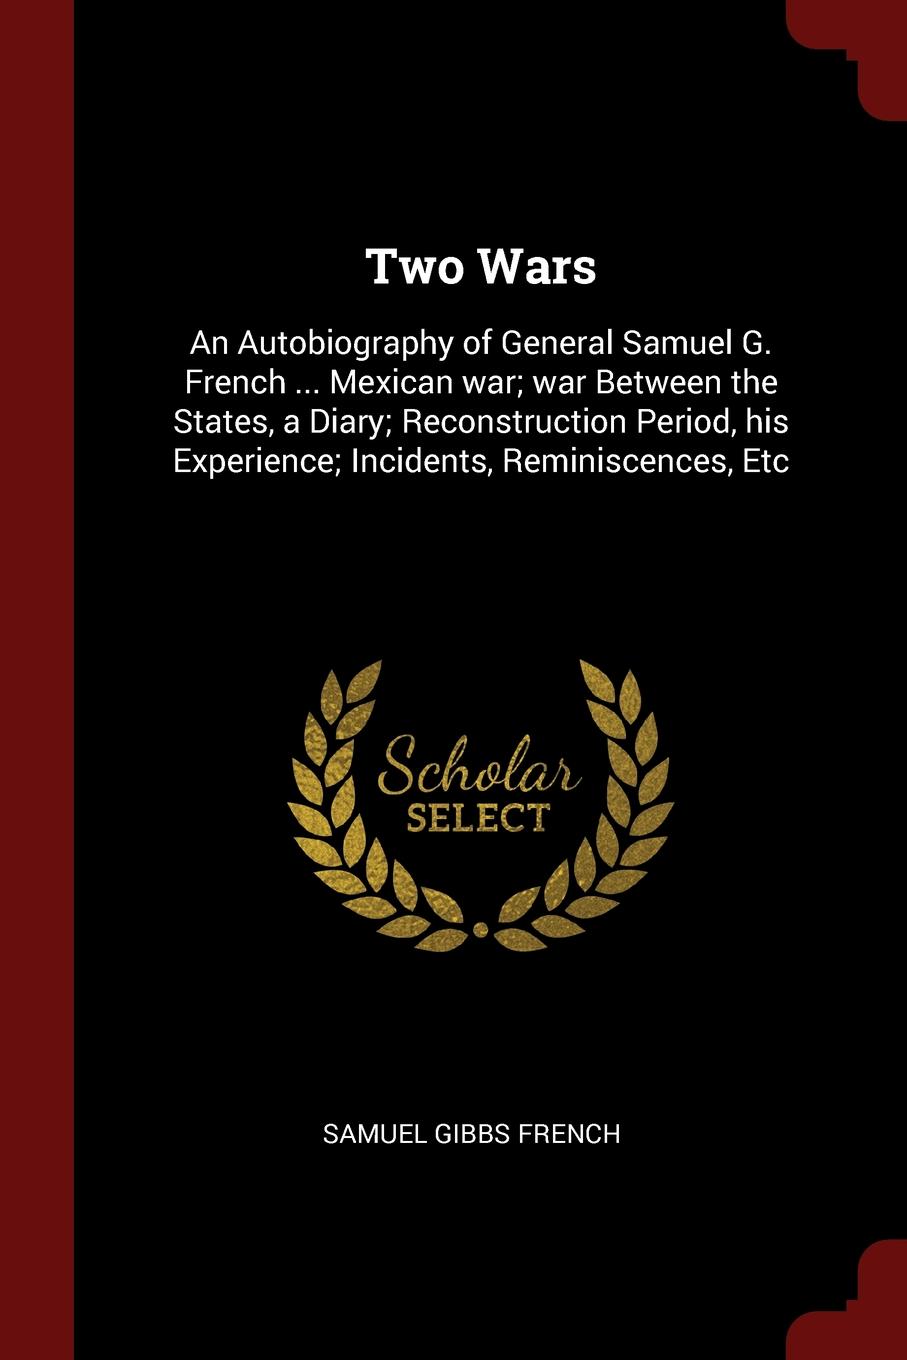 Two Wars. An Autobiography of General Samuel G. French ... Mexican war; war Between the States, a Diary; Reconstruction Period, his Experience; Incidents, Reminiscences, Etc